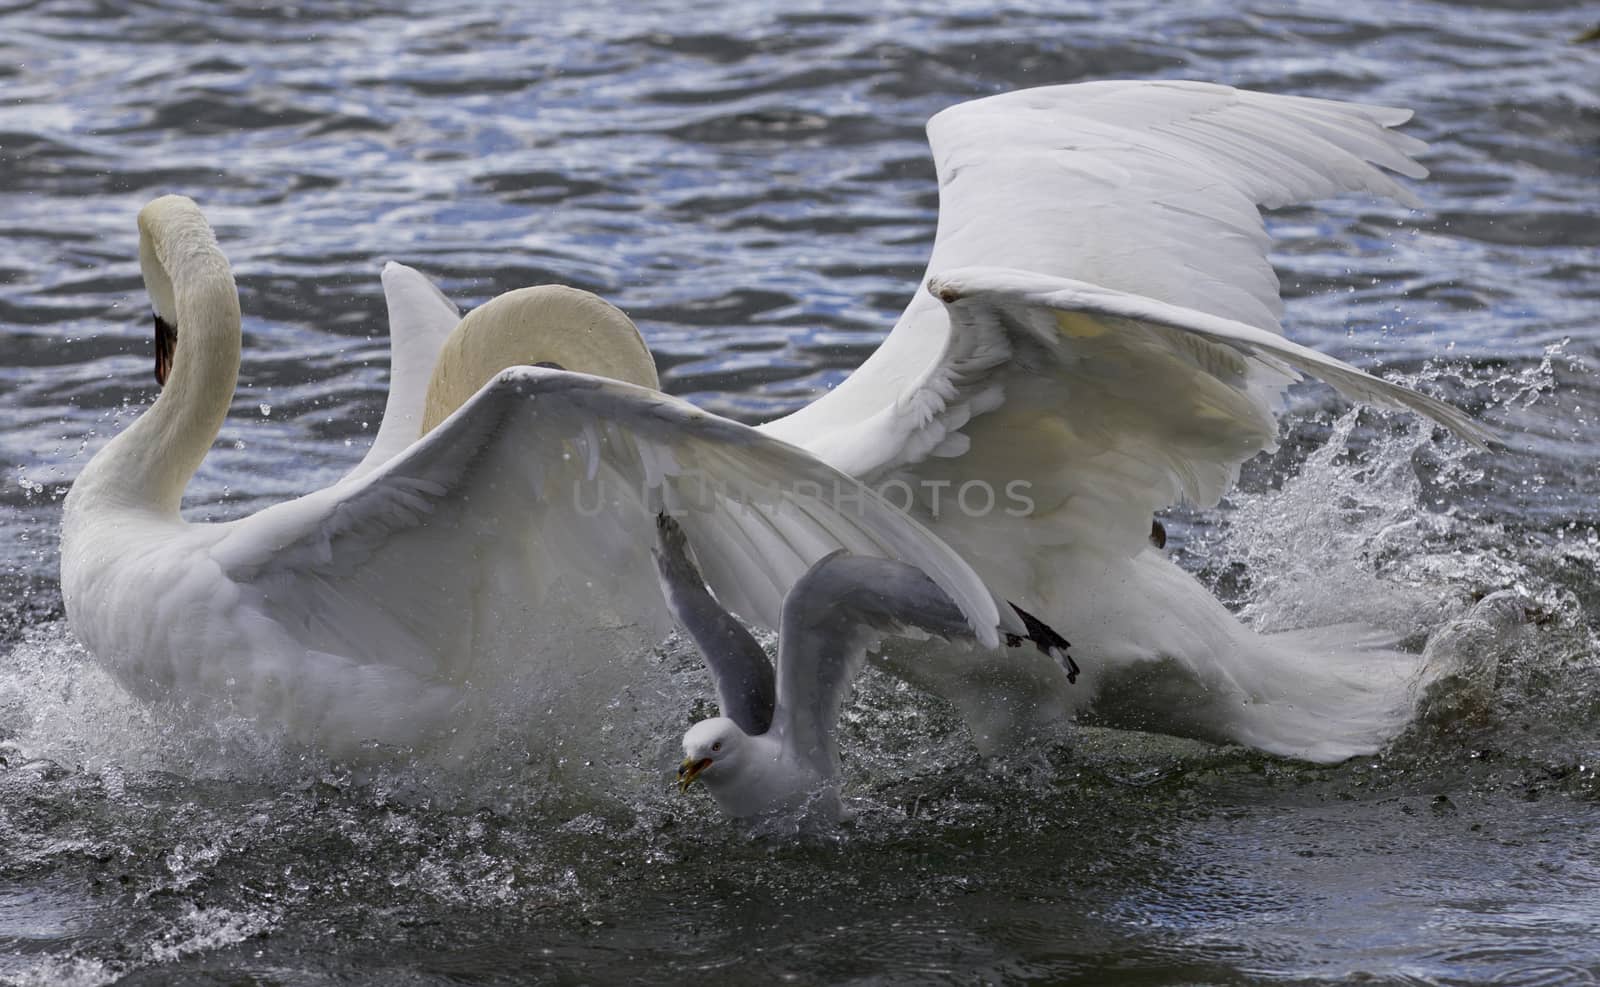 Amazing expressive image with the fighting swans